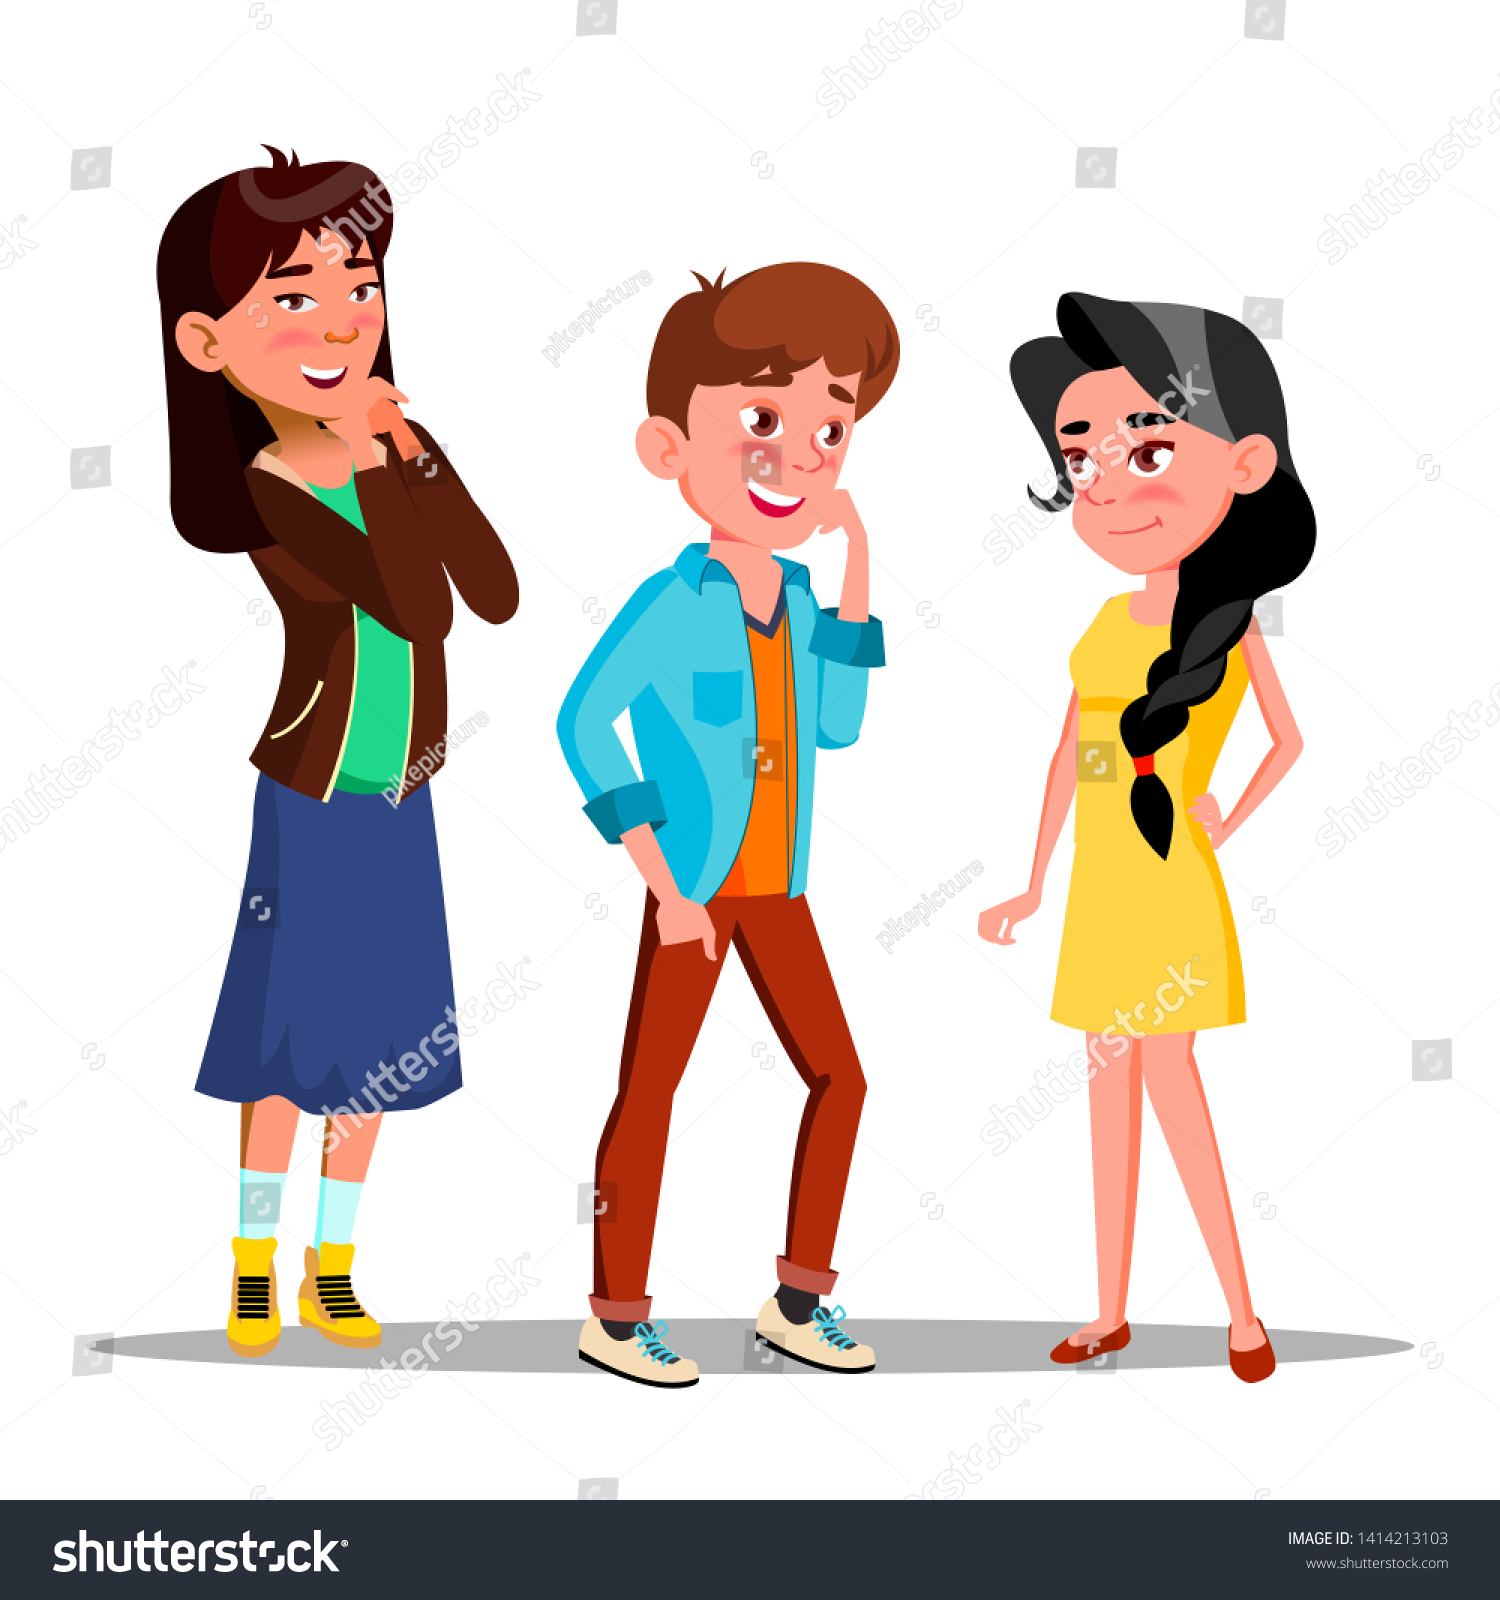 Shy Characters Young Boy Girl Smiling Stock Vector Royalty Free